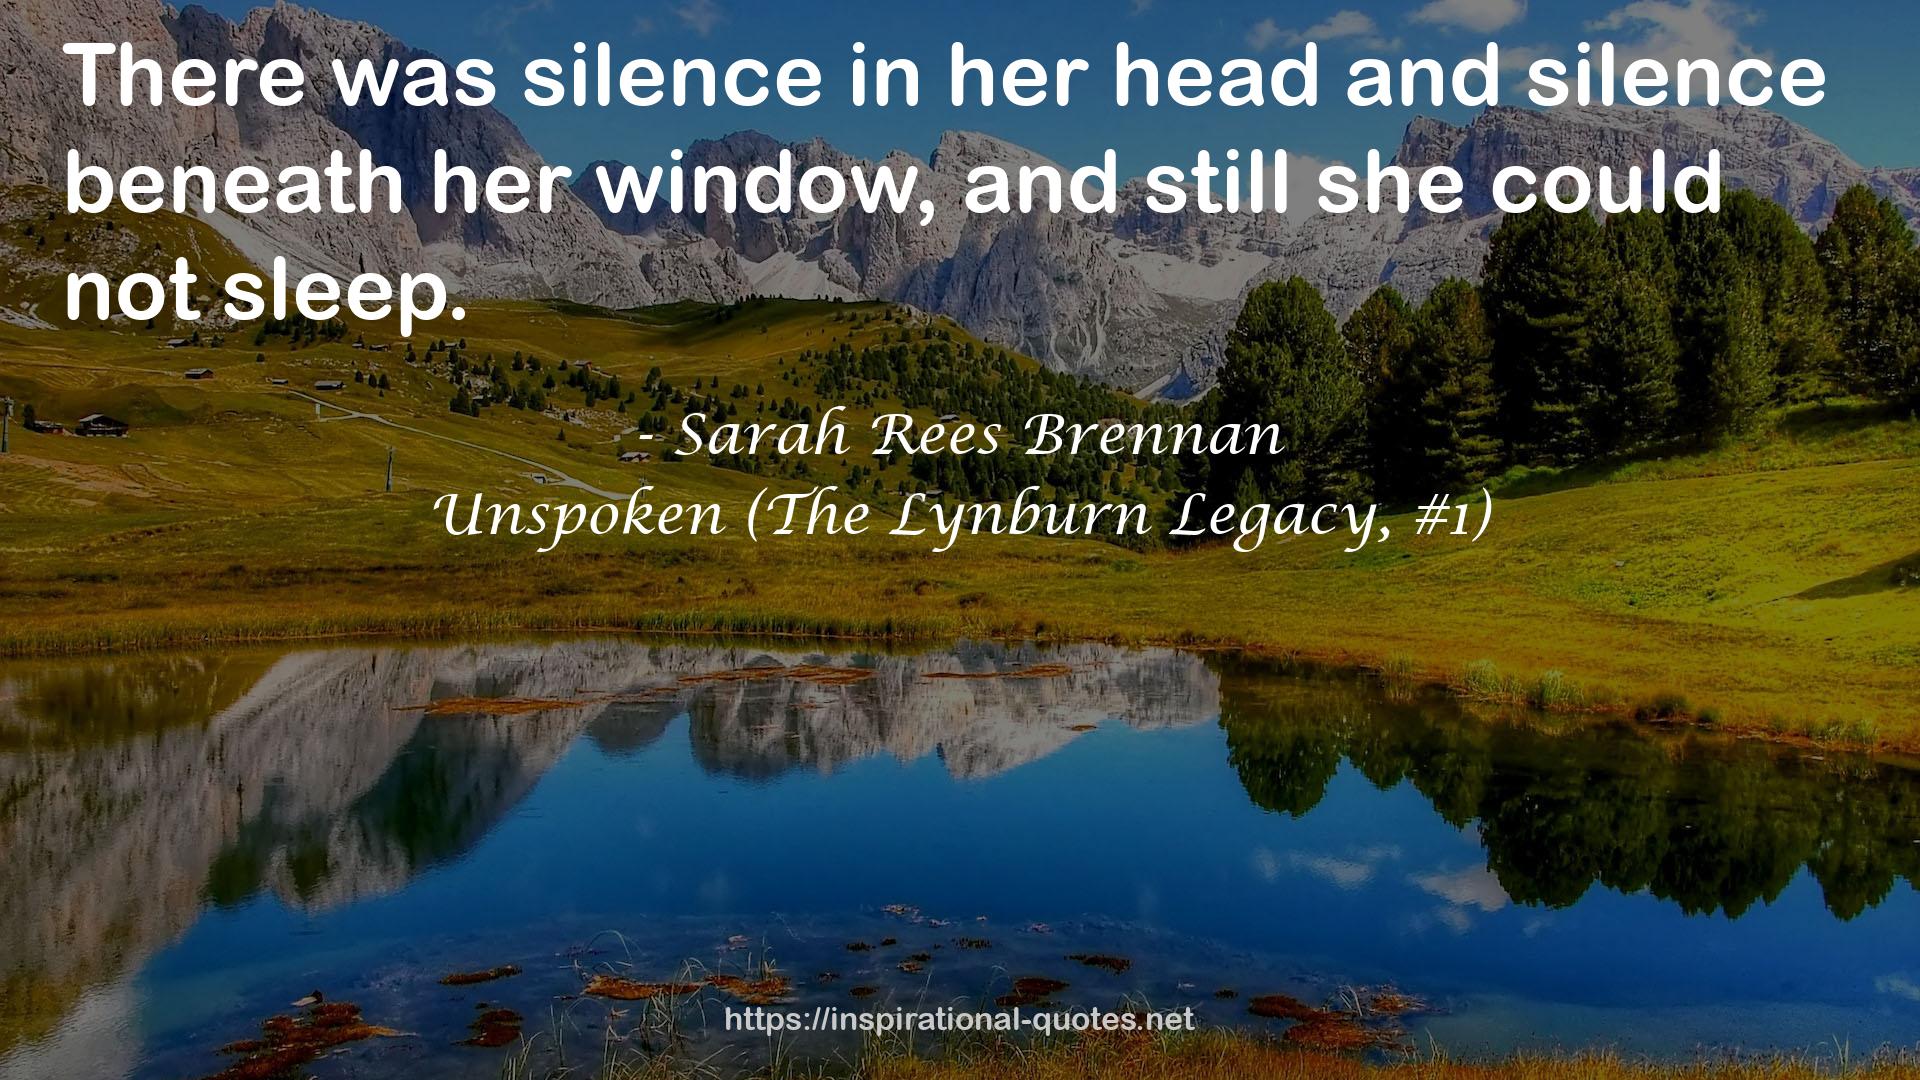 Unspoken (The Lynburn Legacy, #1) QUOTES